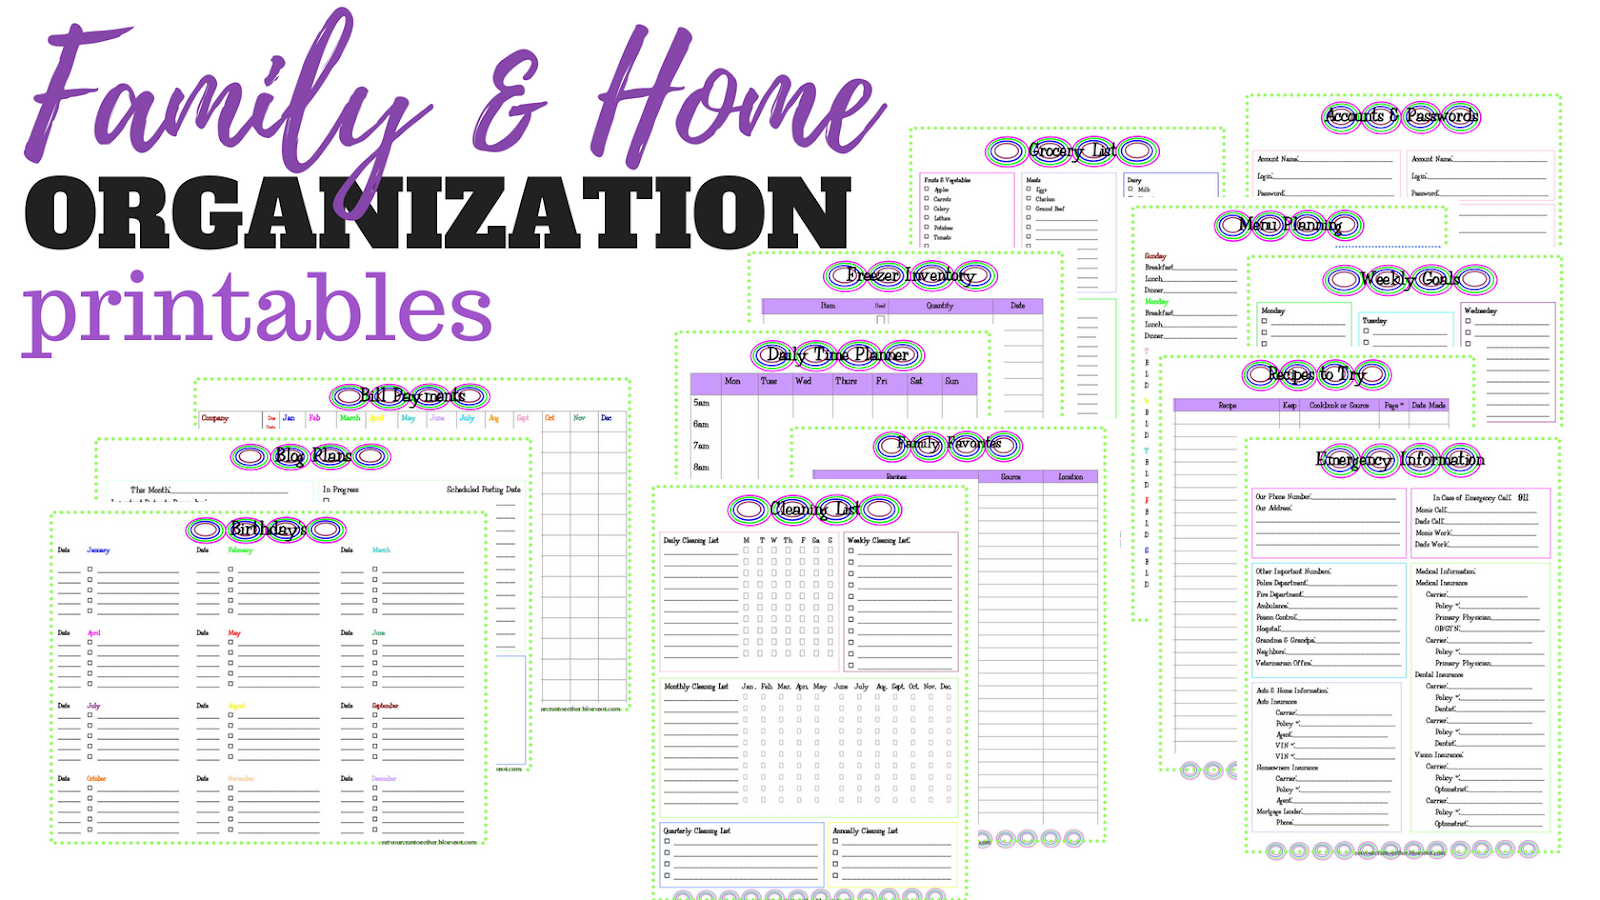 Family And Home Organization Binder Printables | Sew Simple Home with regard to Free Home Organization Binder Printables